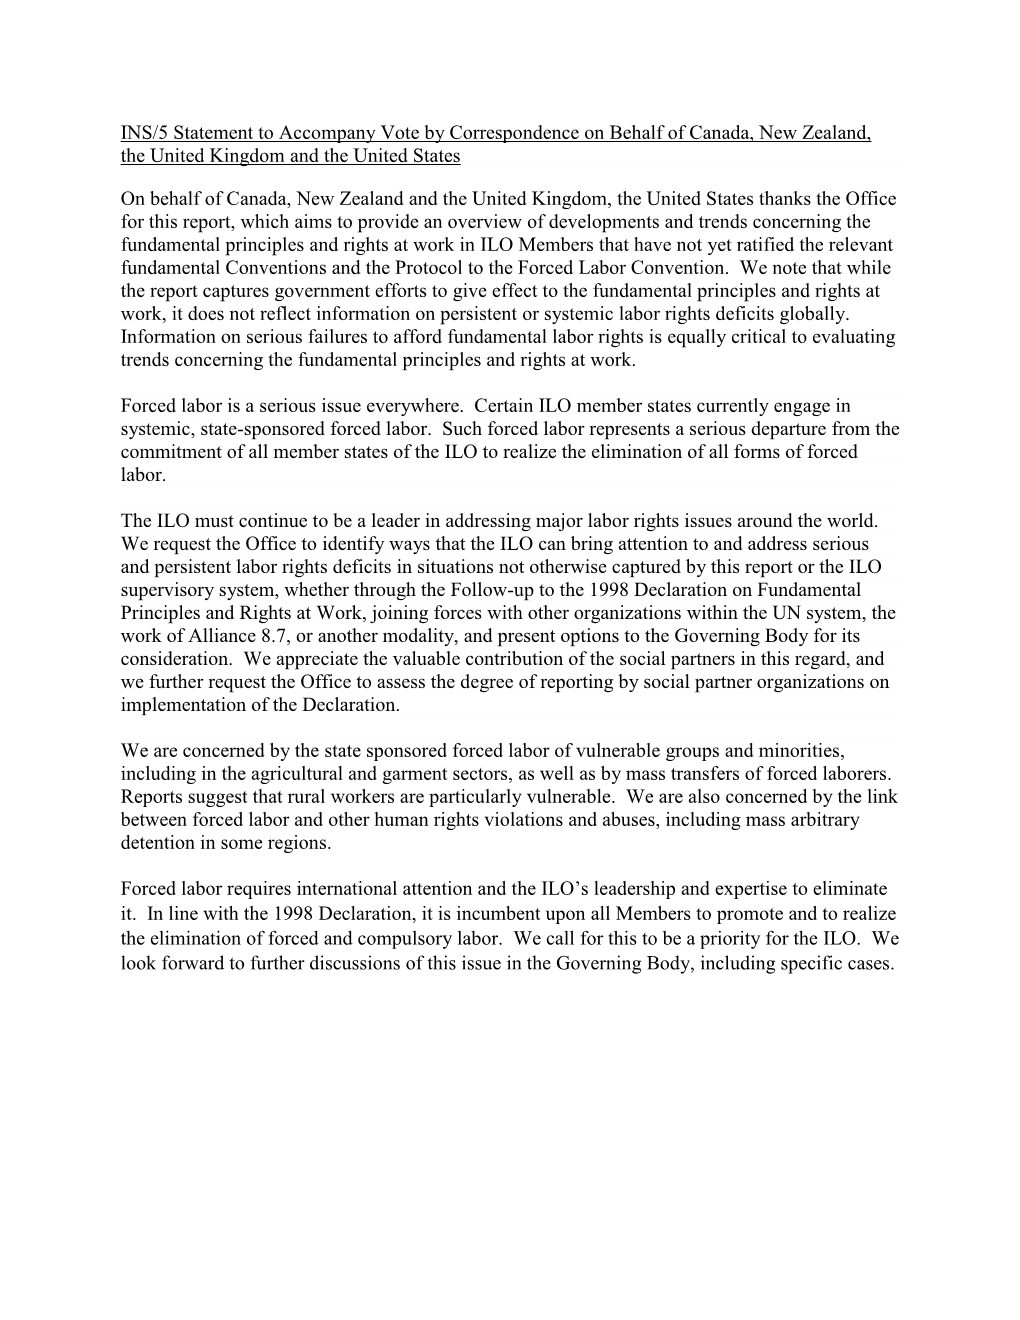 INS/5 Statement to Accompany Vote by Correspondence on Behalf of Canada, New Zealand, the United Kingdom and the United States